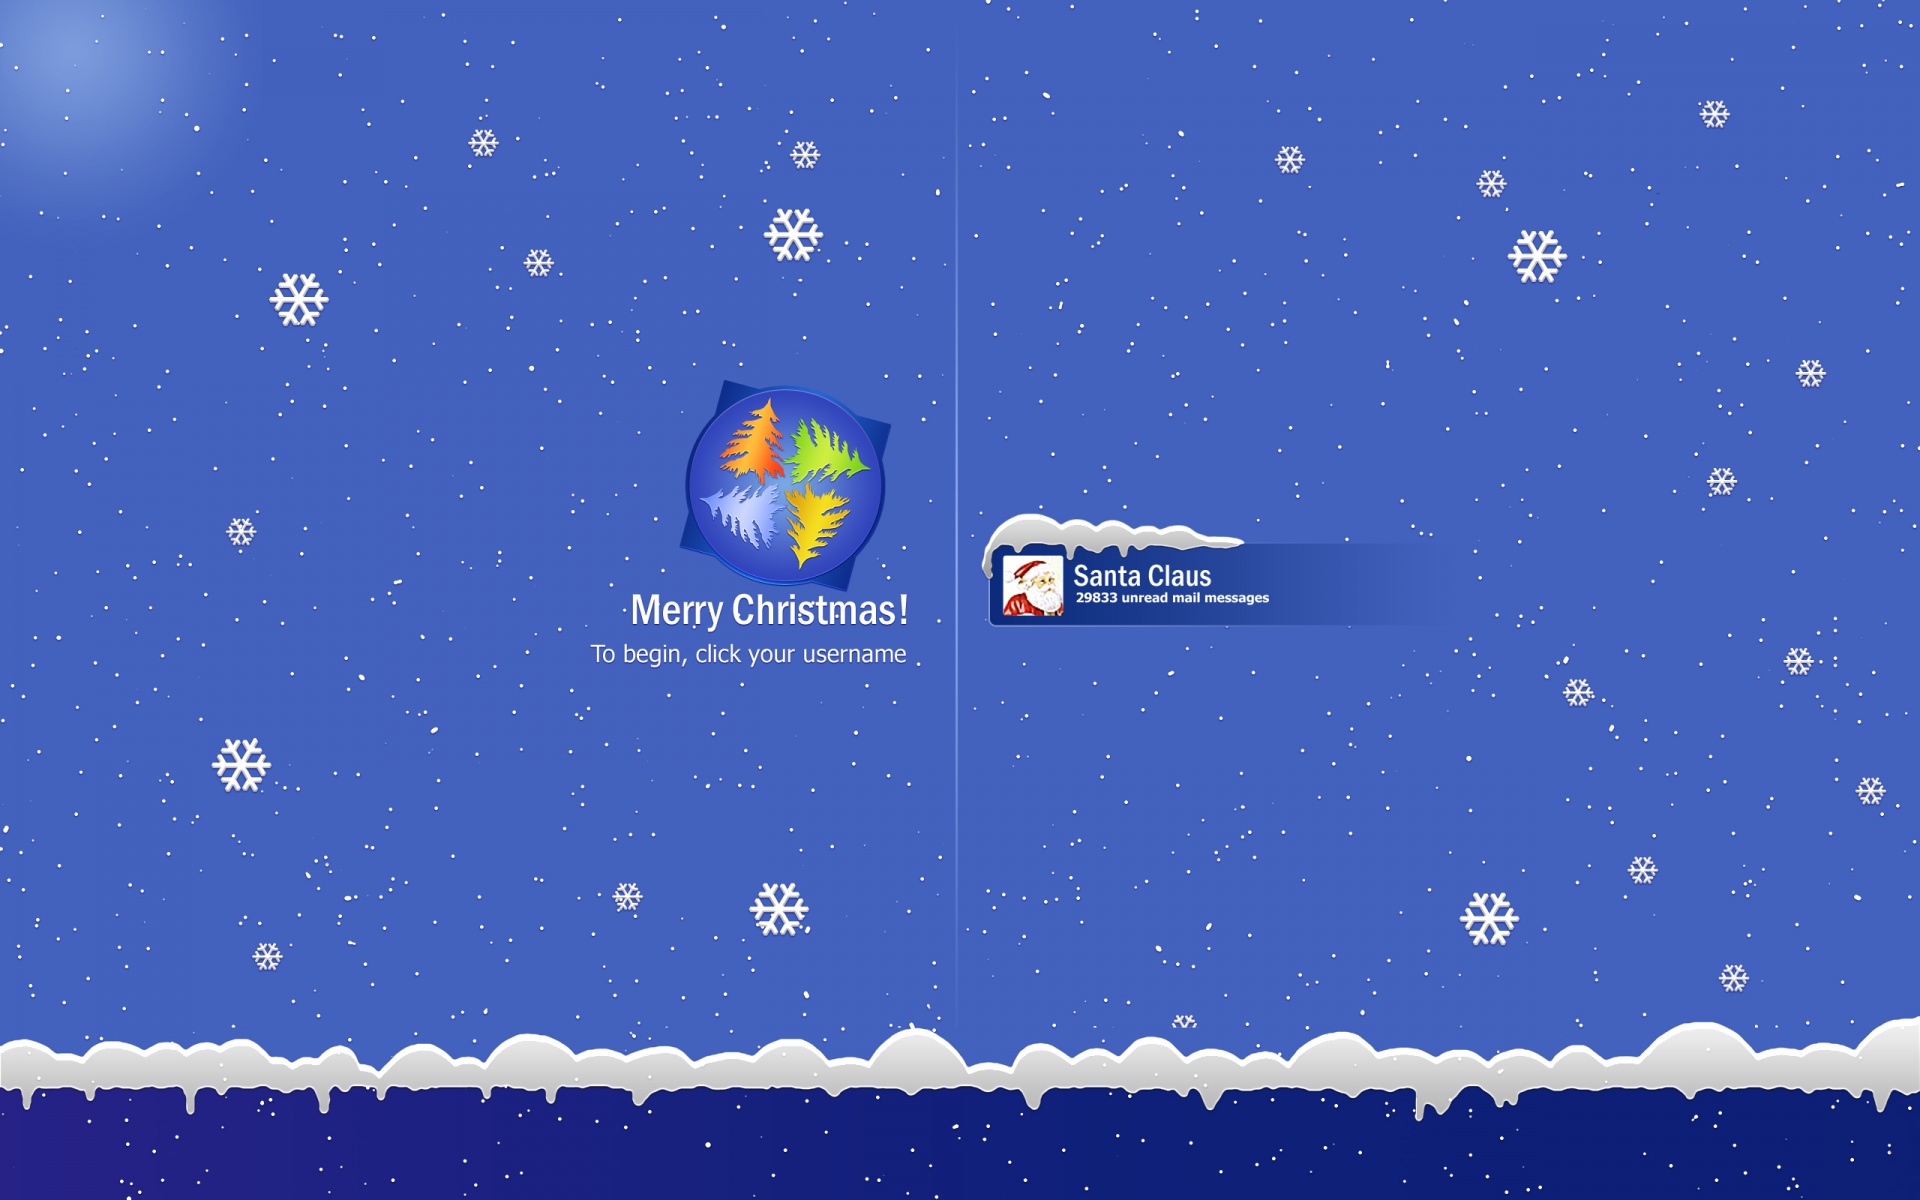 Free Download Christmas Windows Xp Login Screen Wallpapers Hd 19x10 For Your Desktop Mobile Tablet Explore 73 Christmas Screen Backgrounds Christmas Wallpapers